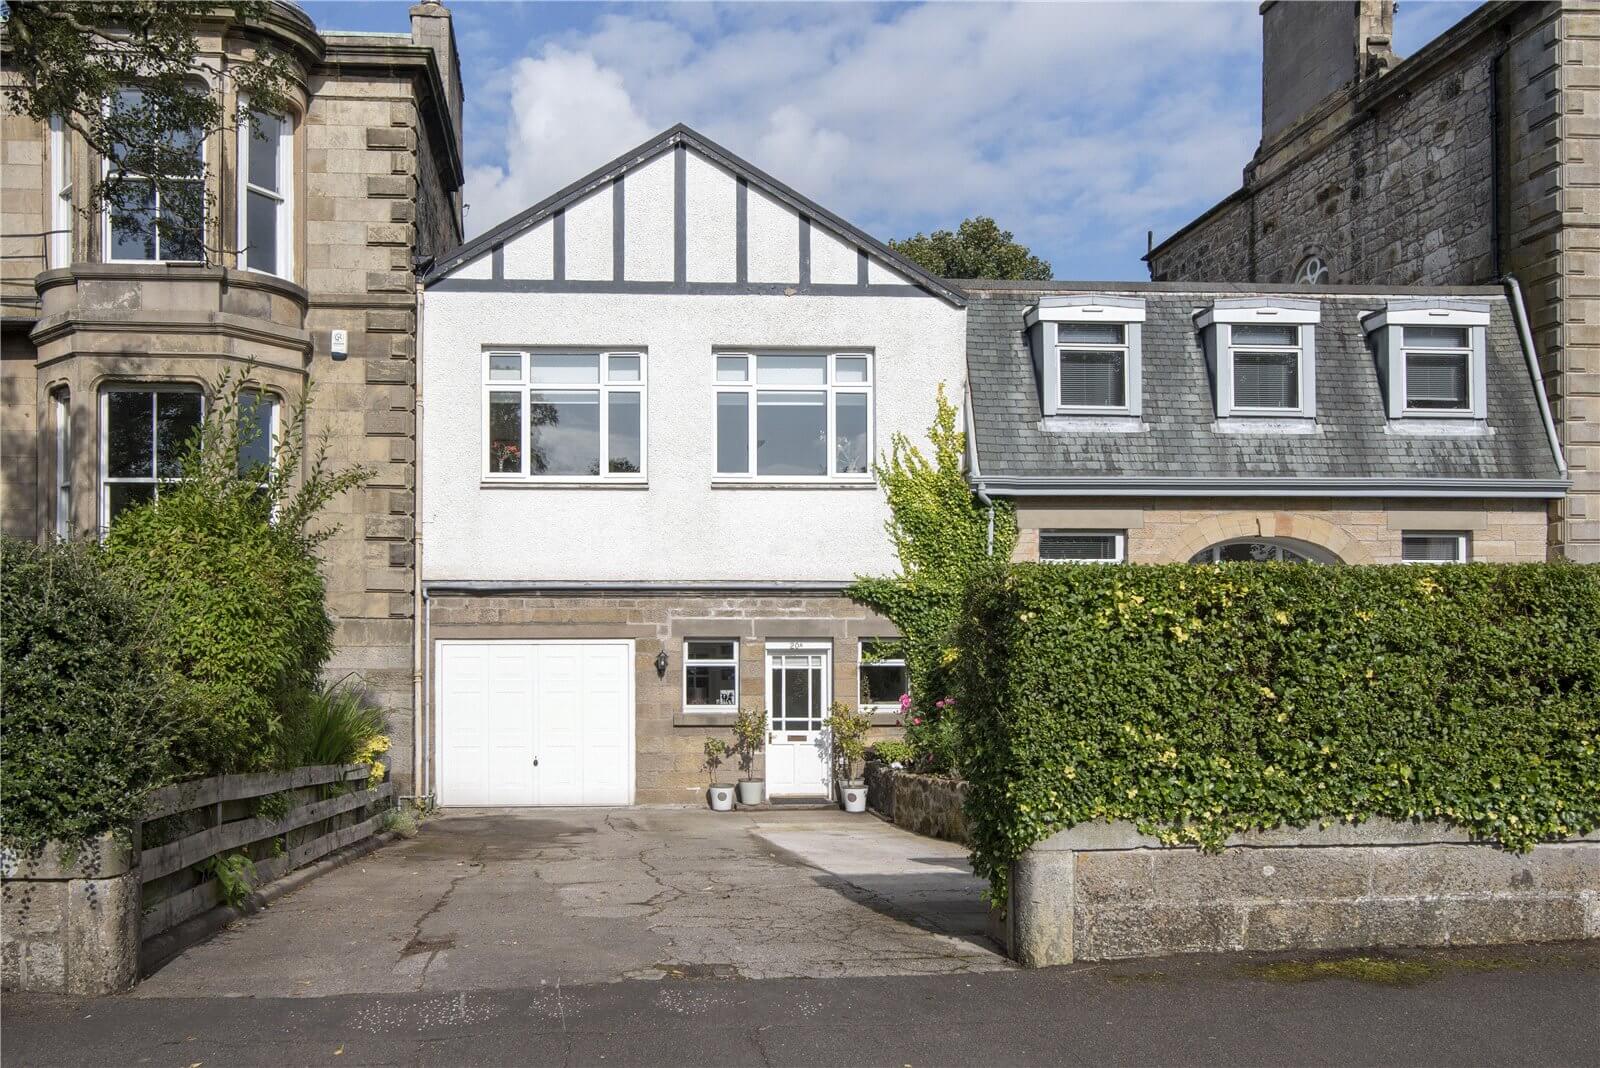 Our latest properties for sale and to let (22nd August 2019)